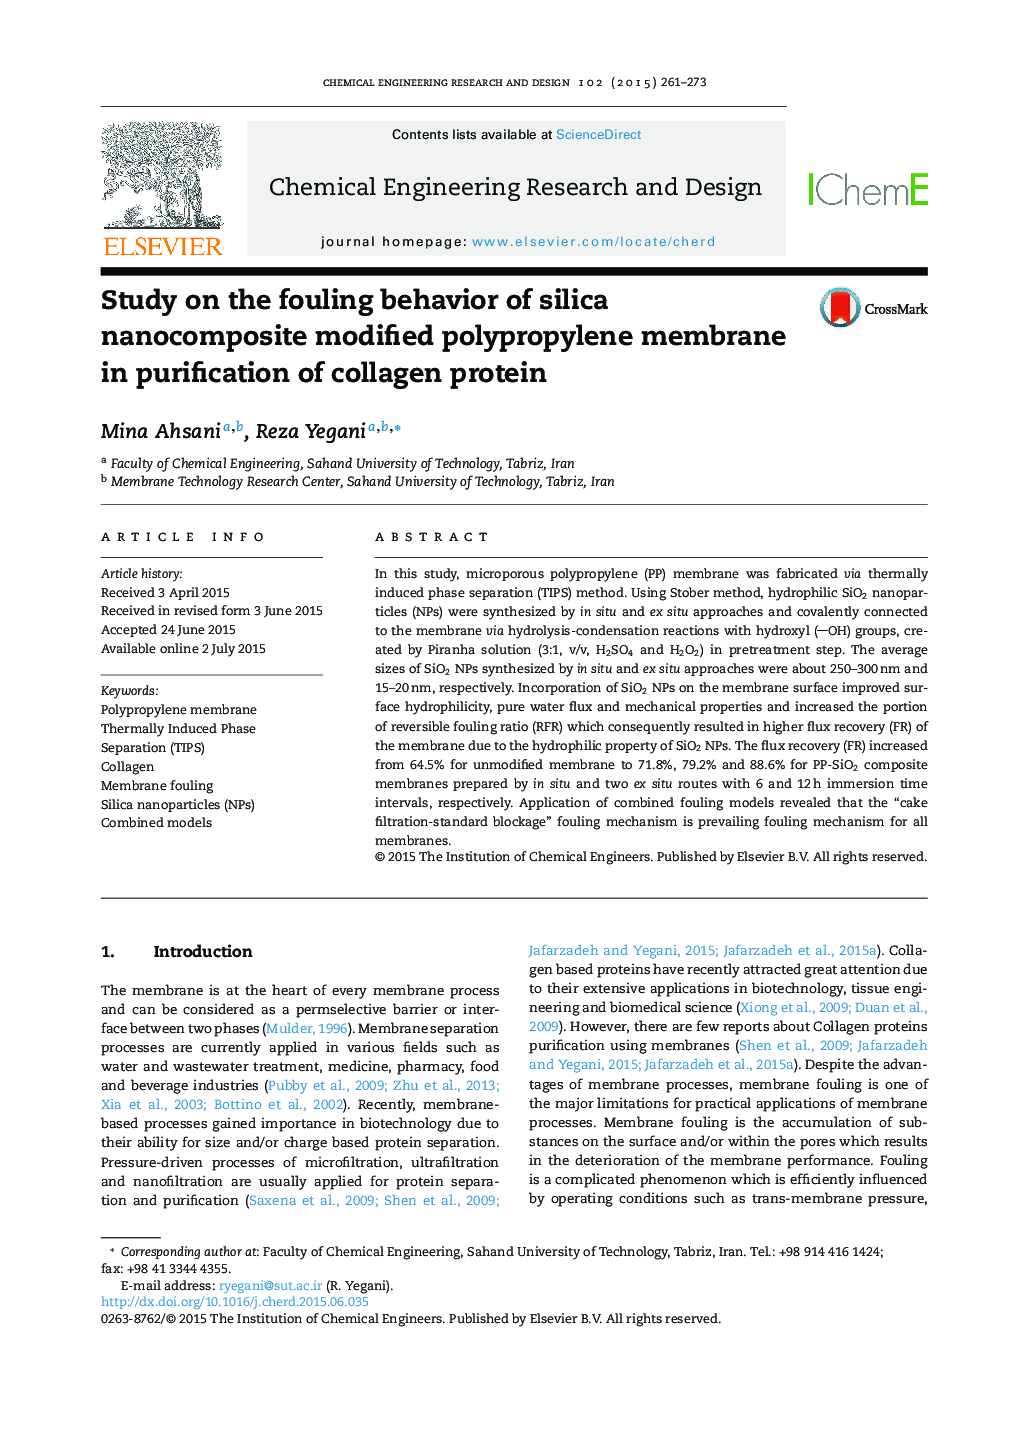 Study on the fouling behavior of silica nanocomposite modified polypropylene membrane in purification of collagen protein